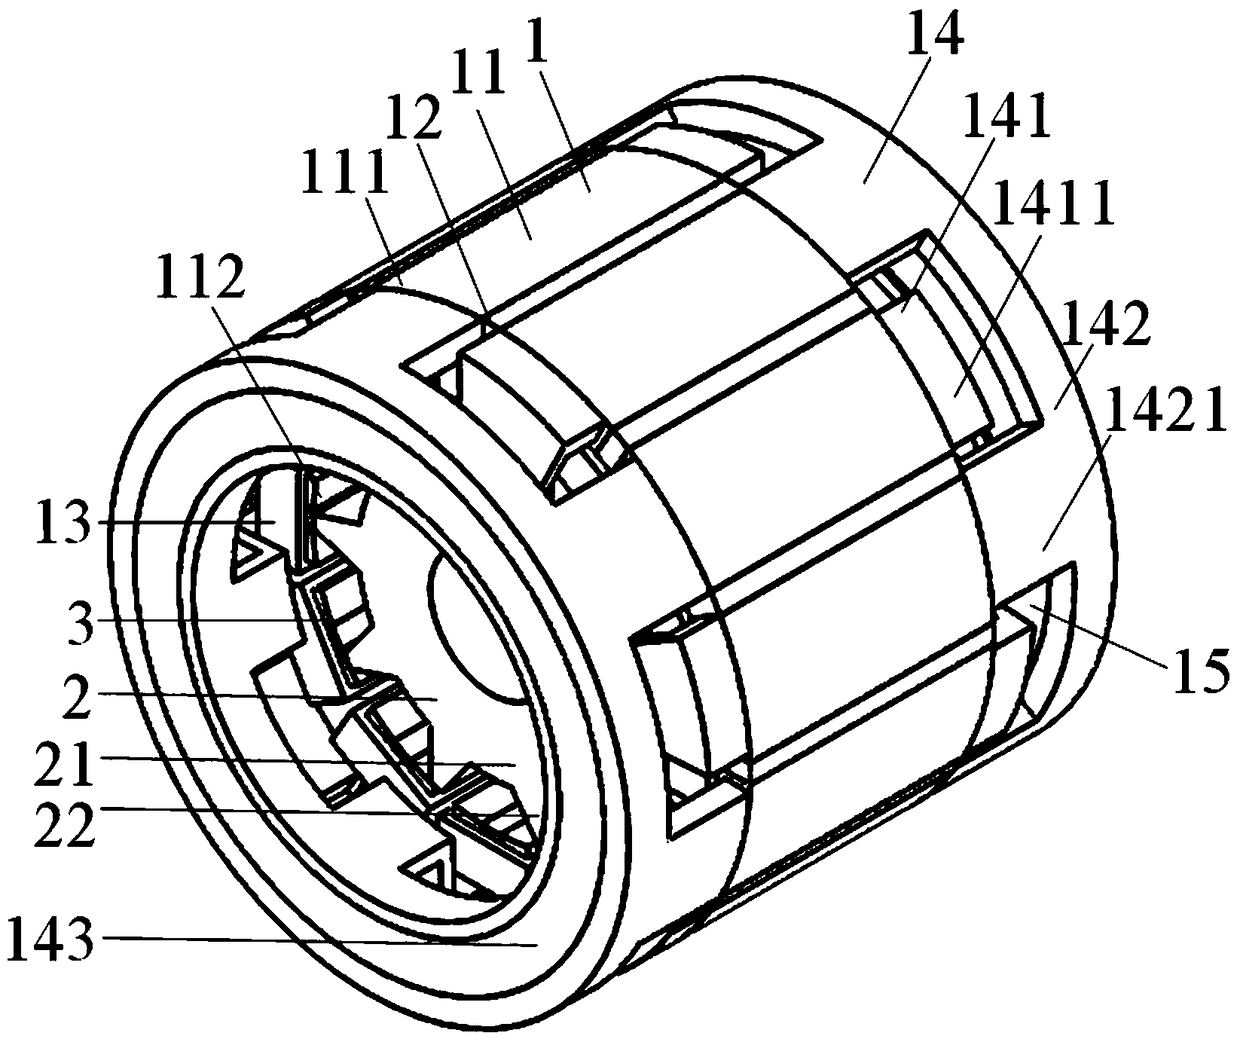 Mixed excitation flux switching motor having stator with claw pole bypass structure